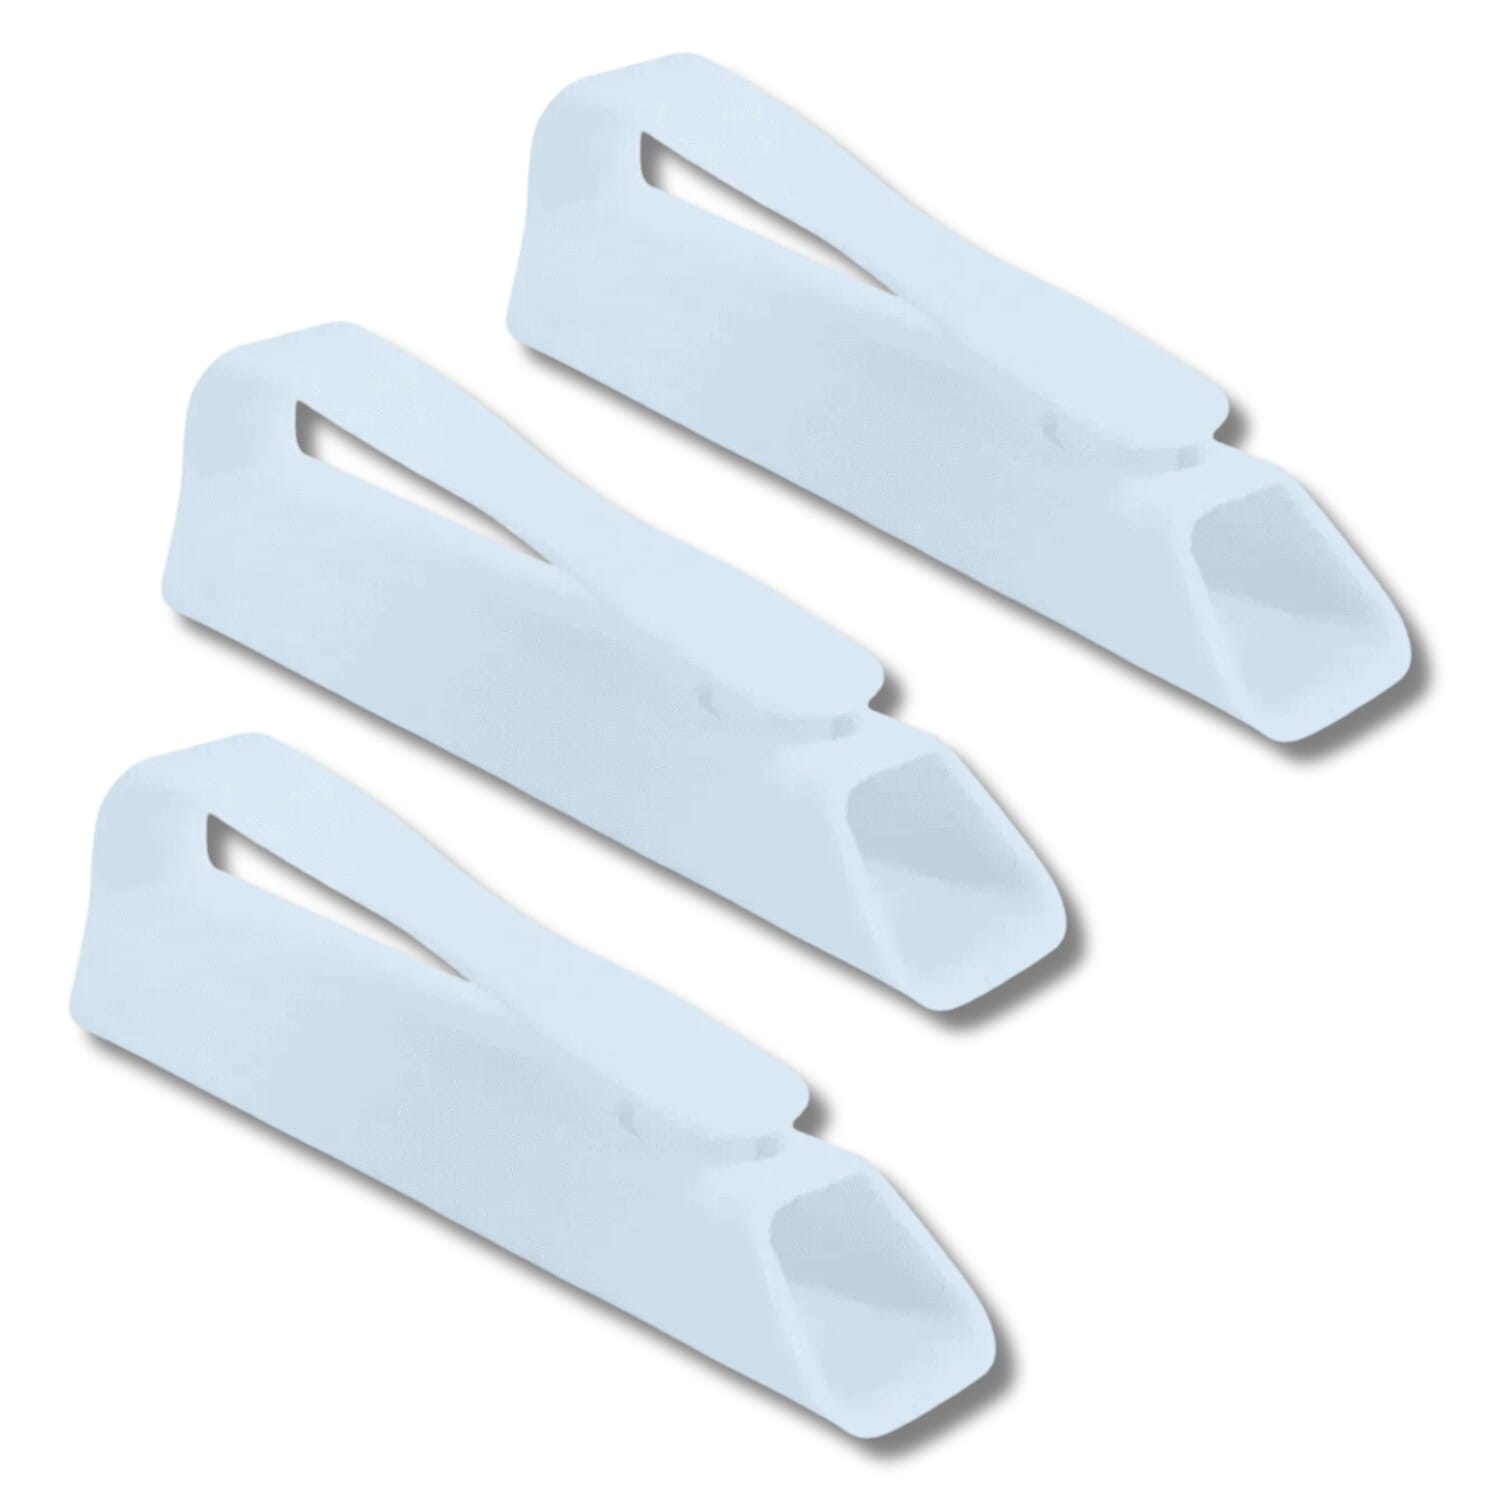 View Plastic Pill Popper Pack of 3 information